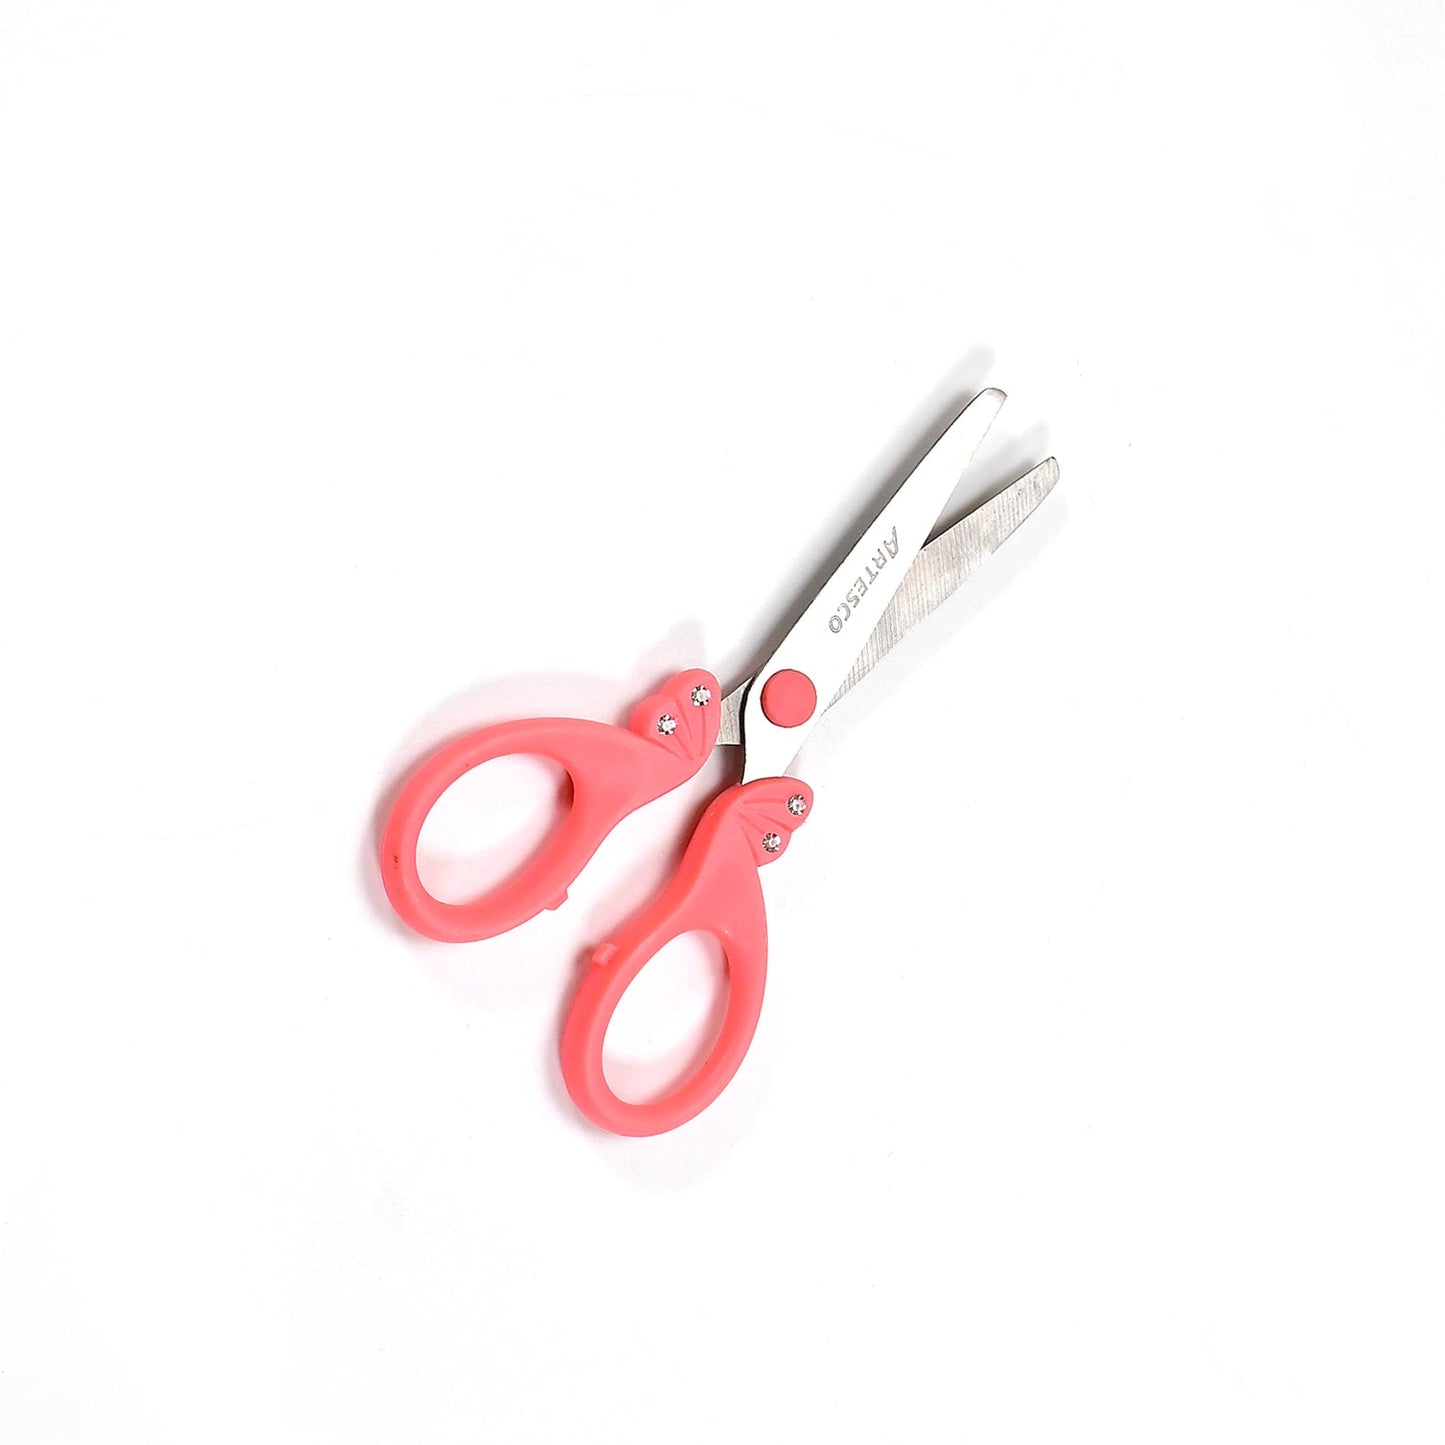 9122 MULTIPURPOSE FANCY SCISSOR | COMFORT GRIP HANDLE AND STAINLESS STEEL BLADES | PAPER, PHOTOS, CRAFTS (1PC) 